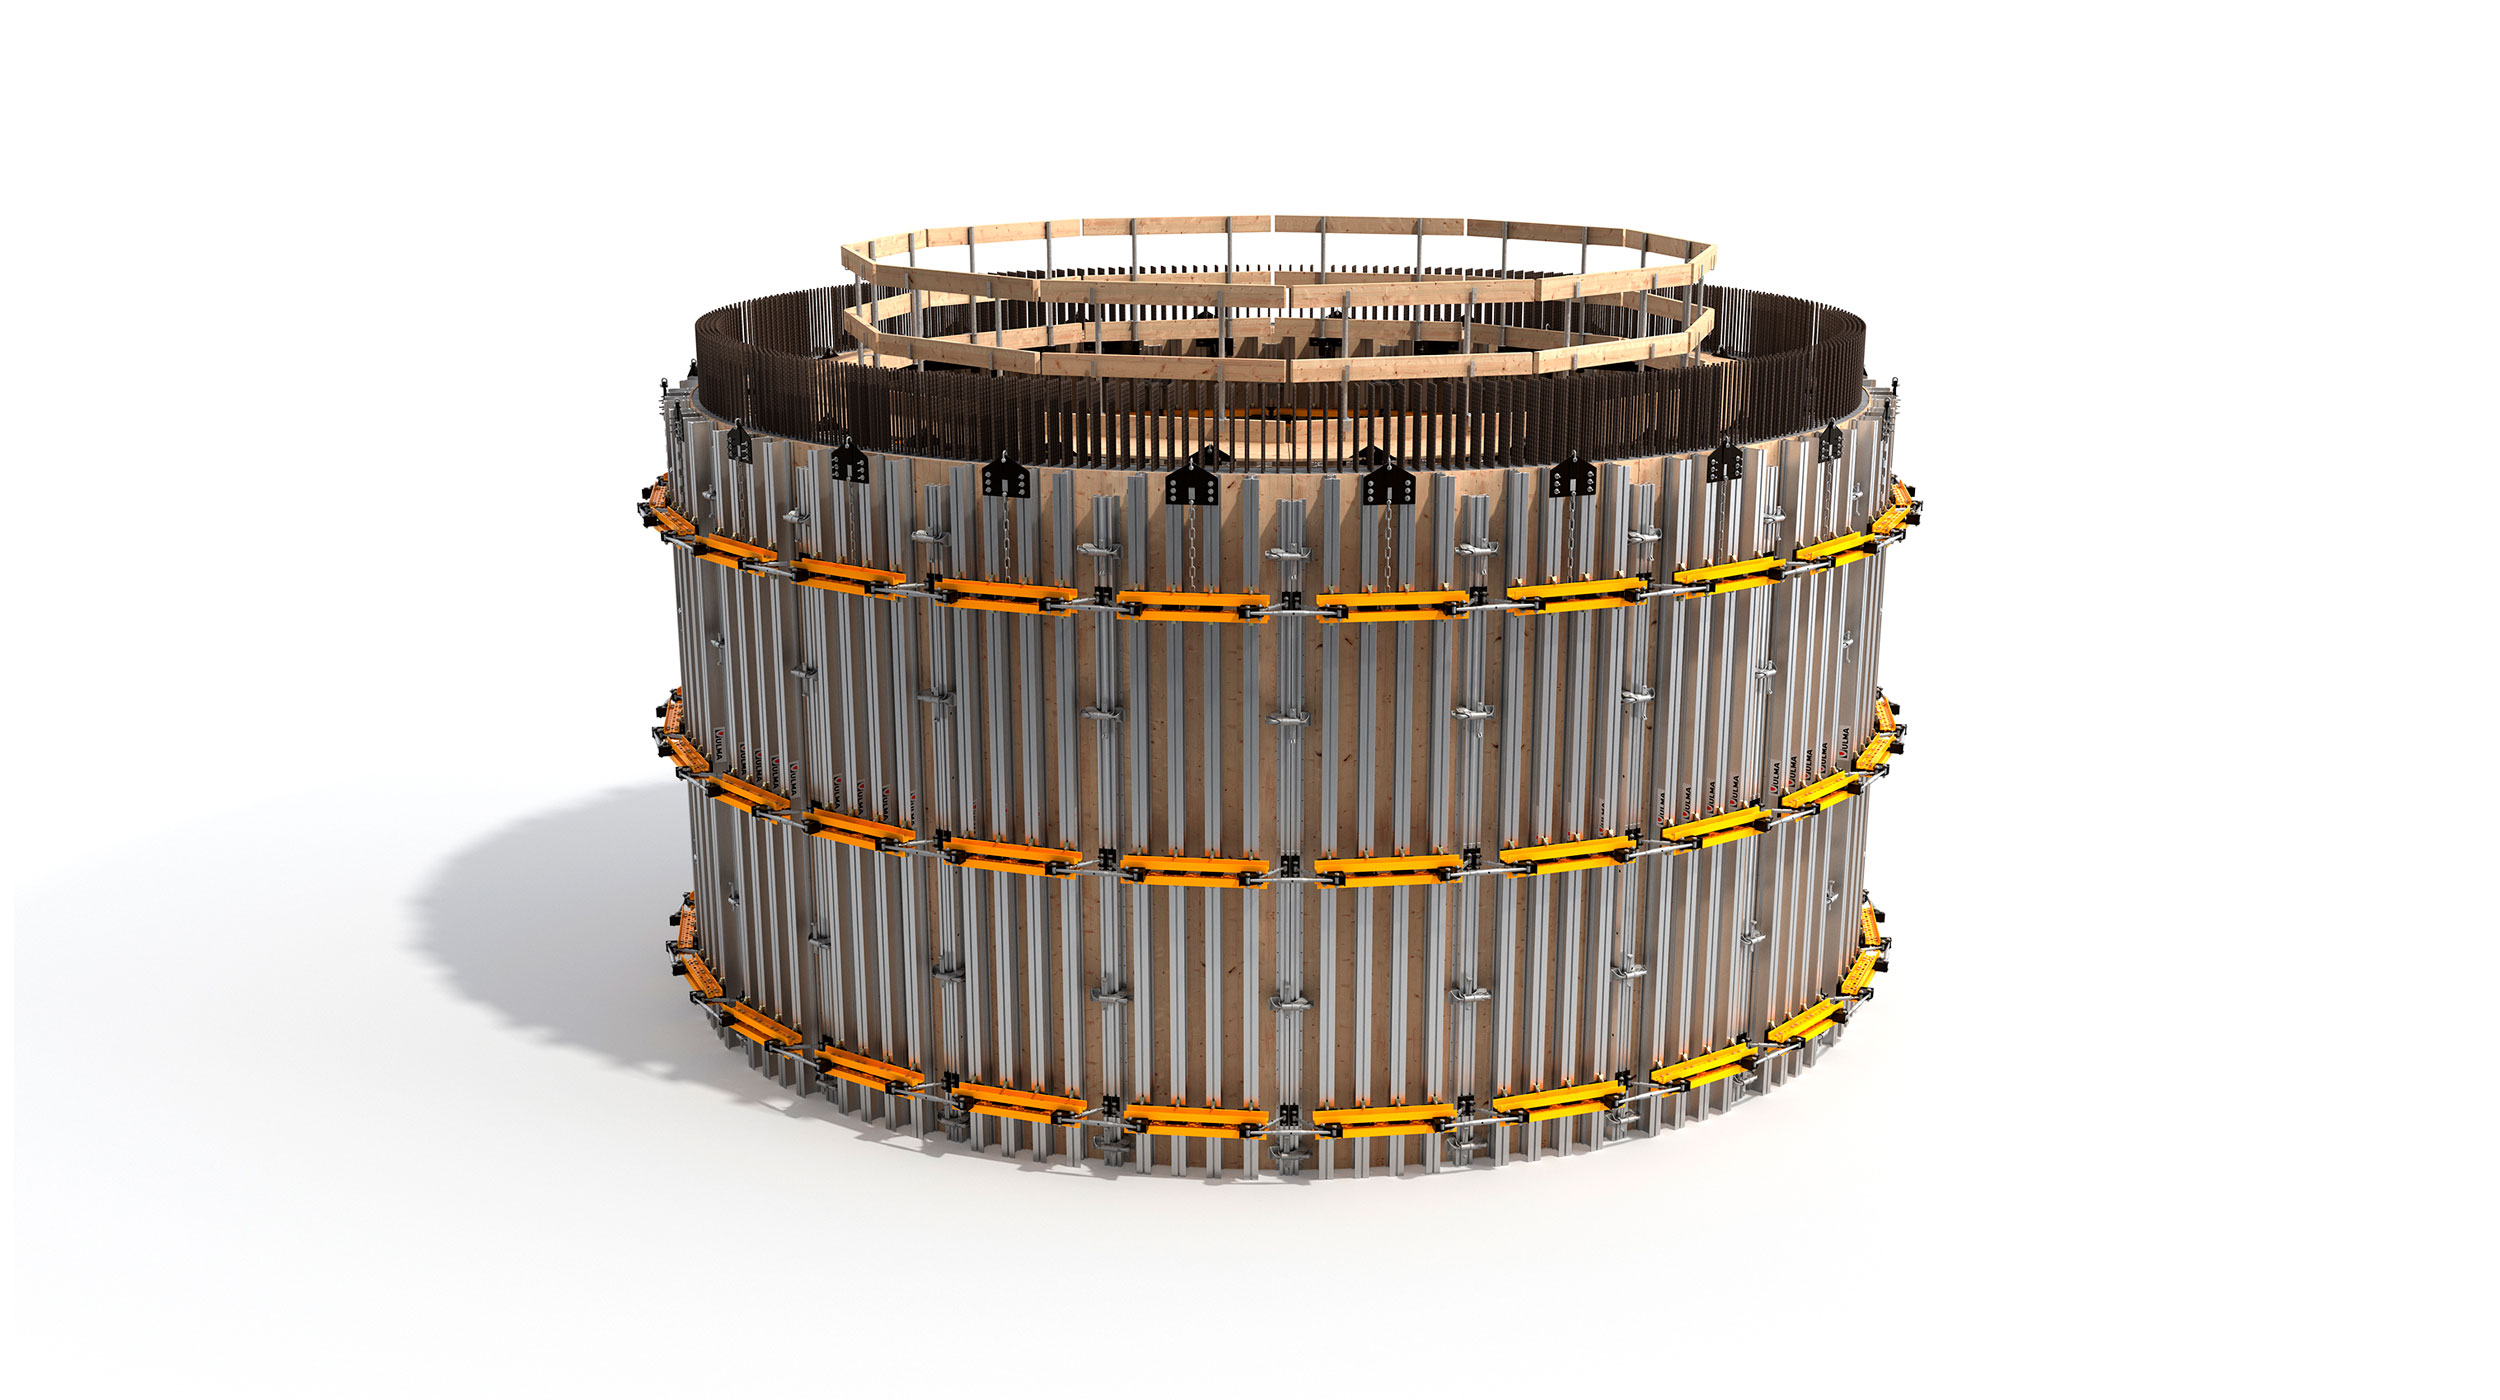 Modular circular formwork system composed of modular panels, which are pre-assembled according to the required radius.